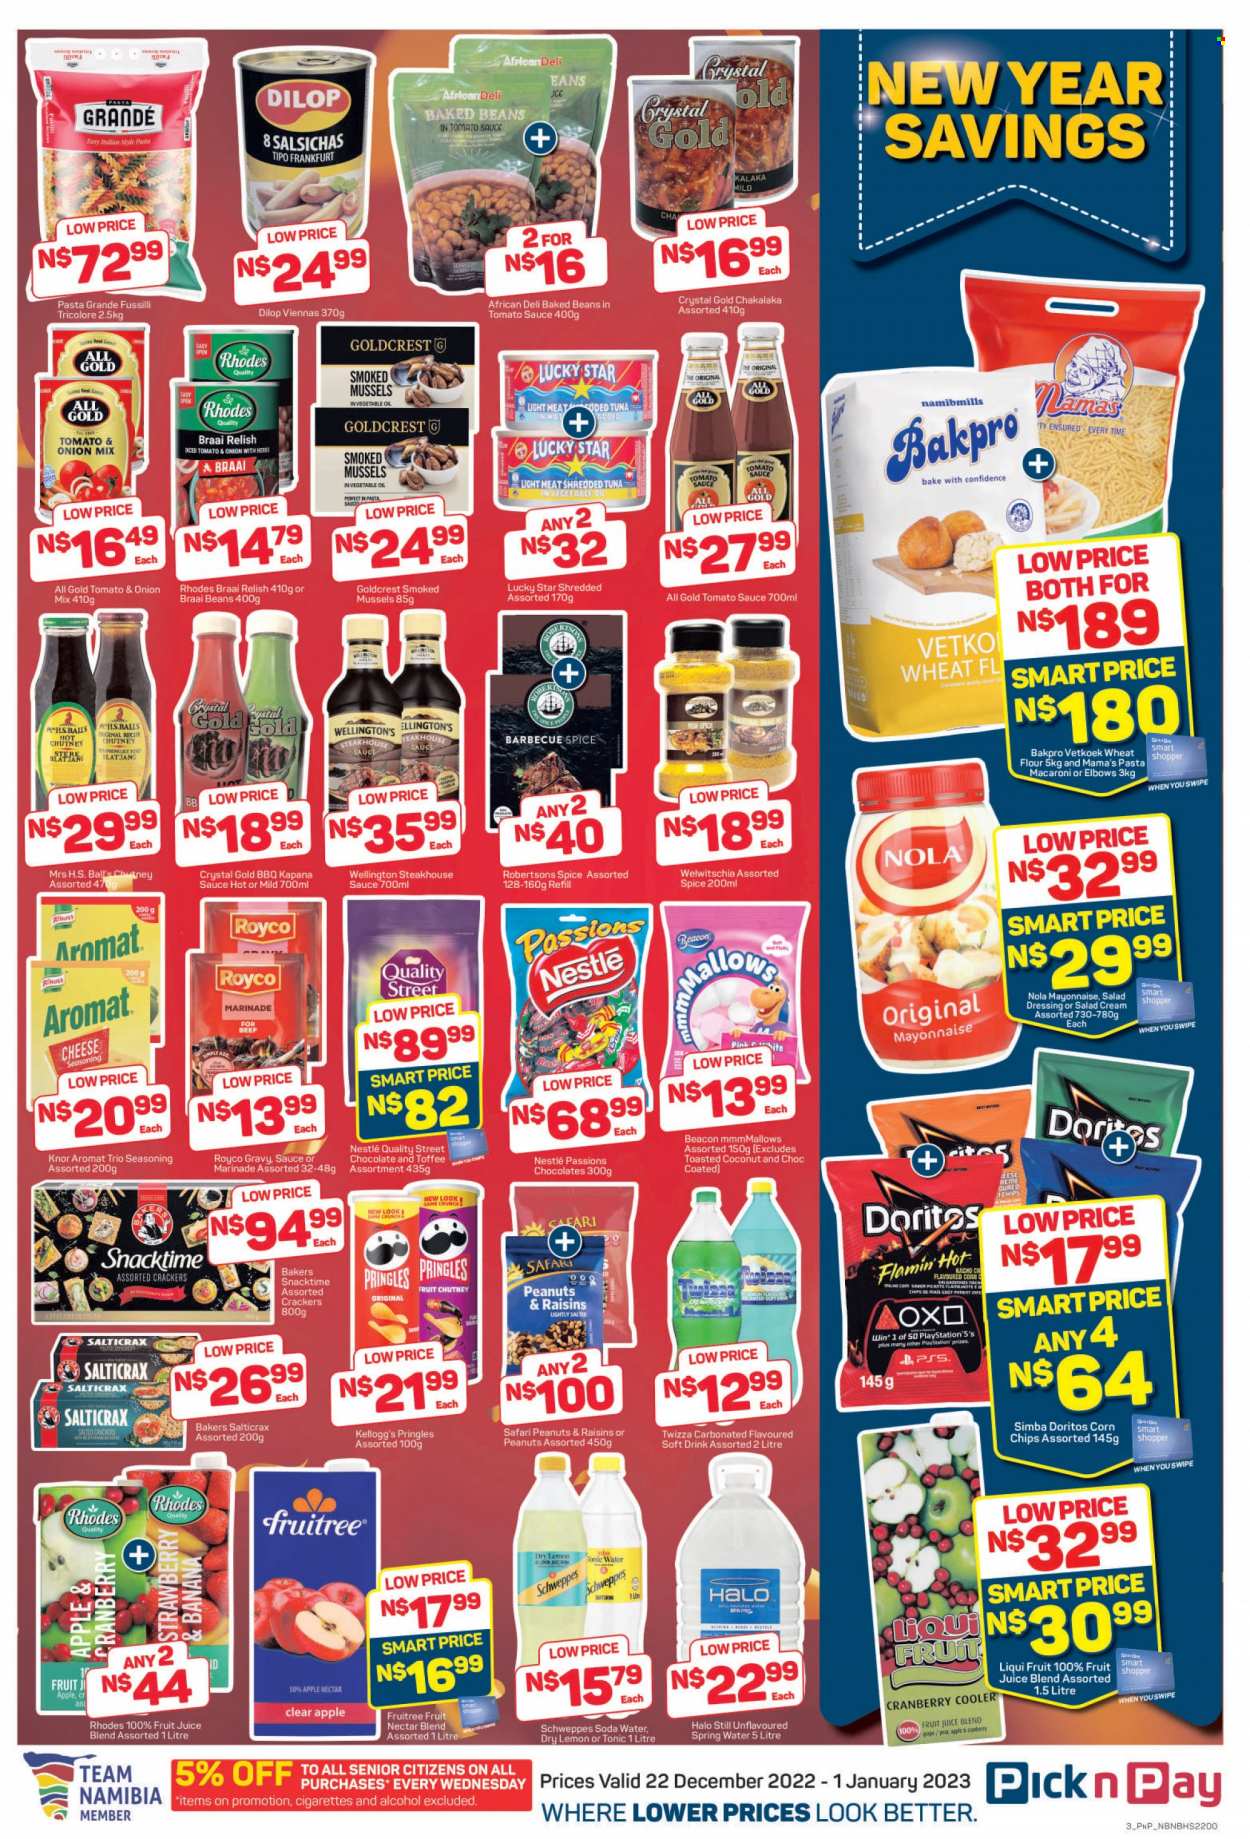 thumbnail - Pick n Pay catalogue  - 22/12/2022 - 01/01/2023 - Sales products - beans, pears, mussels, tuna, pasta sauce, macaroni, pasta, Knorr, chakalaka, Mama's, vienna sausage, salad cream, Nestlé, toffee, crackers, Kellogg's, Salticrax, Doritos, Pringles, chips, Snacktime, corn chips, Simba, flour, wheat flour, baked beans, Pasta Grandé, spice, salad dressing, dressing, marinade, chutney, oil, peanuts, Schweppes, fruit juice, juice, fruit nectar, tonic, soft drink, spring water, soda, alcohol, Bakers. Page 3.